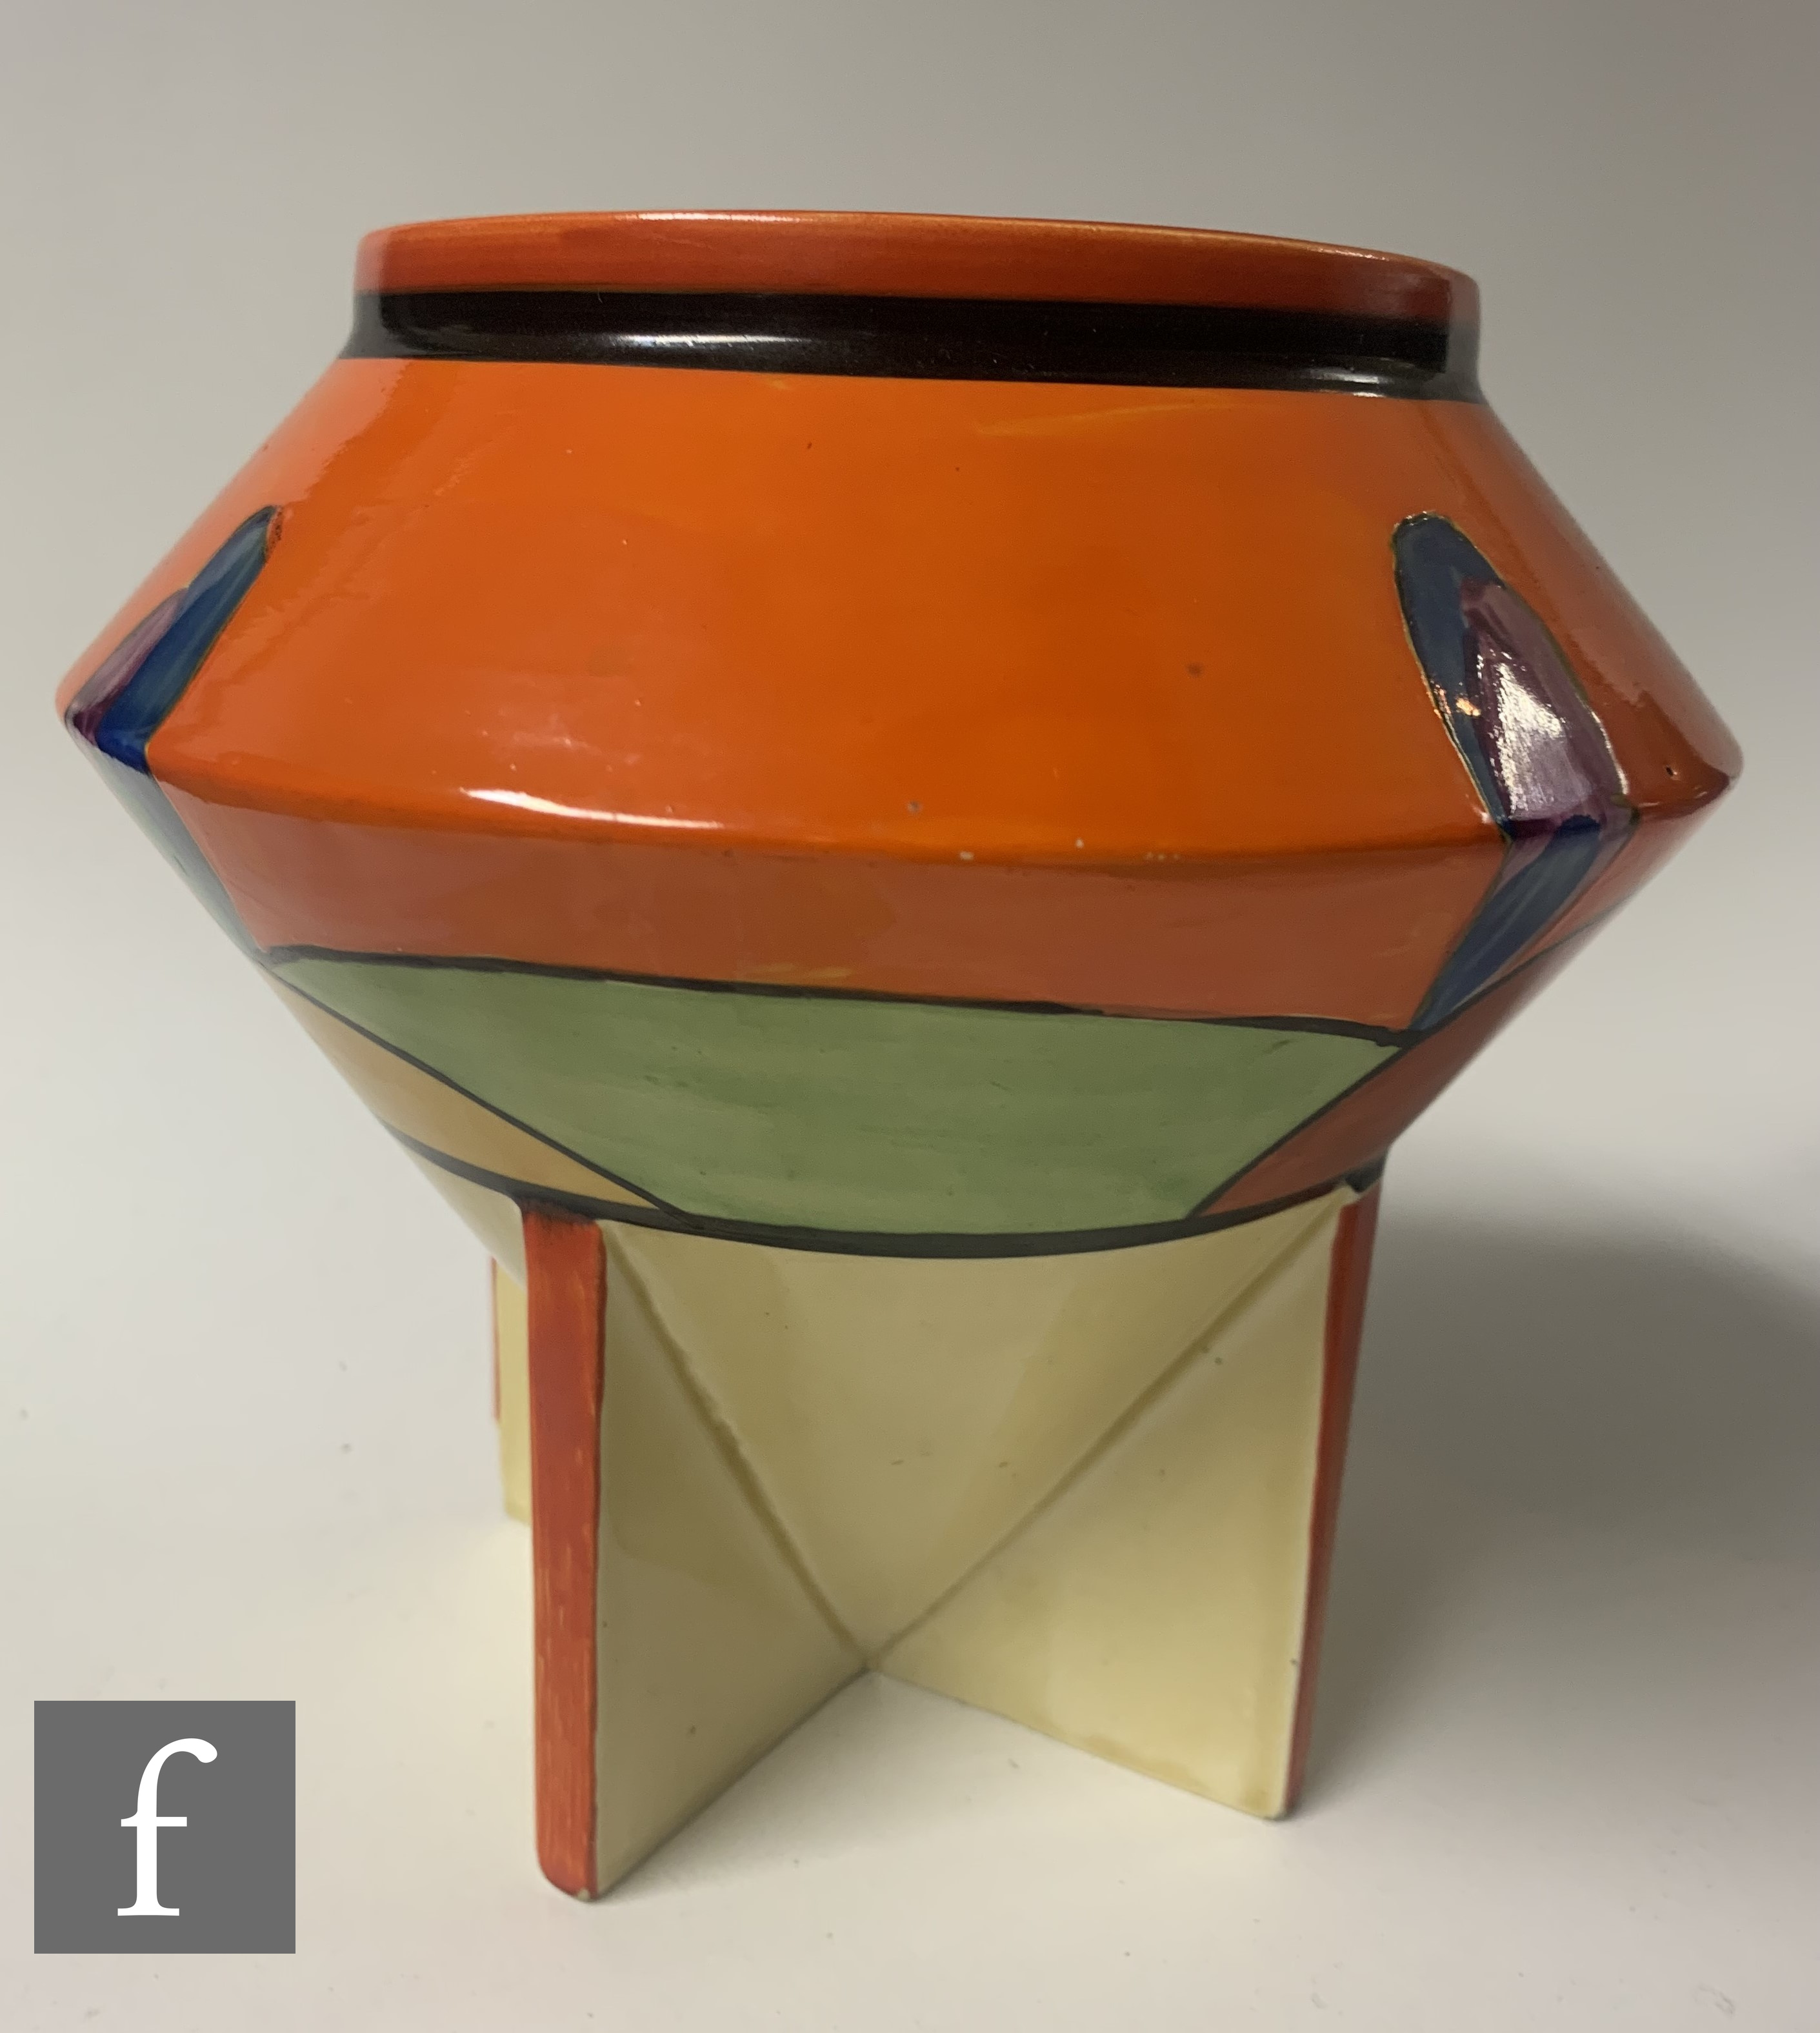 Clarice Cliff - Applique Avignon - A Conical shape rose bowl circa 1930, hand painted with a - Image 3 of 6